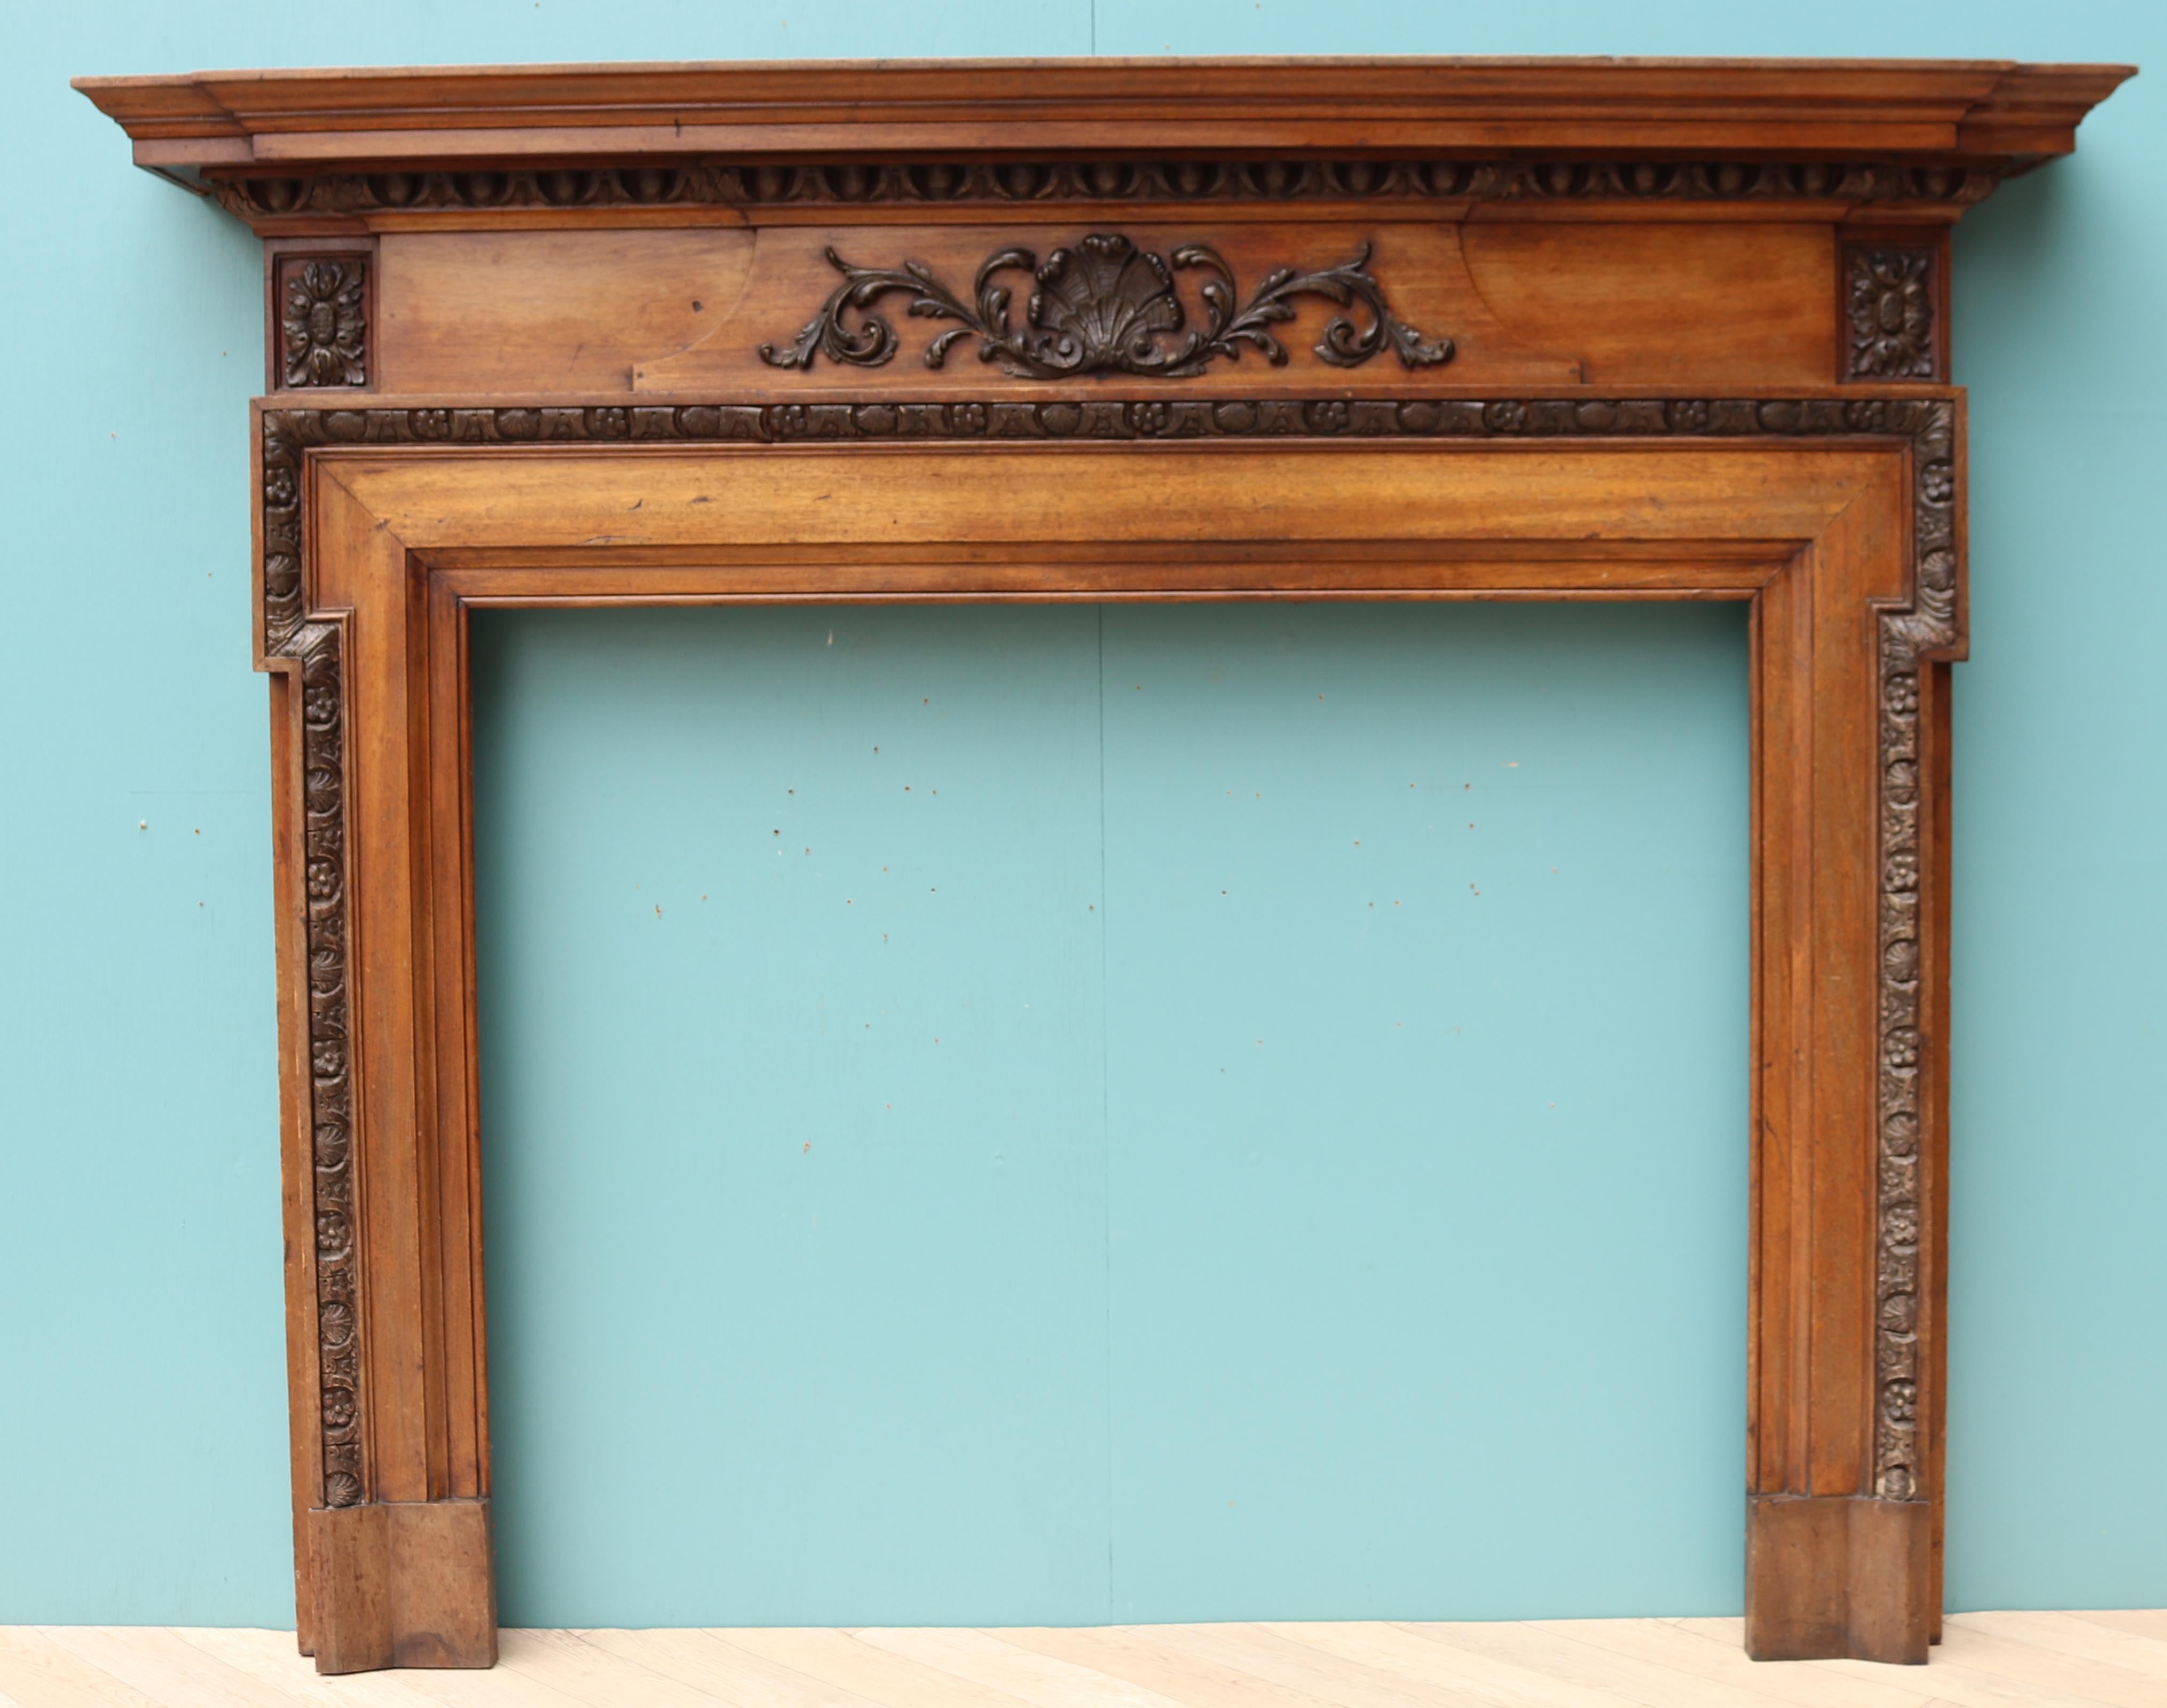 An antique fire surround constructed from mahogany with gesso (composition) moldings.
 
Additional Dimensions:
 
Opening height  93 cm
 
Opening Width  101.5
 
Width between outside of foot blocks 149 cm